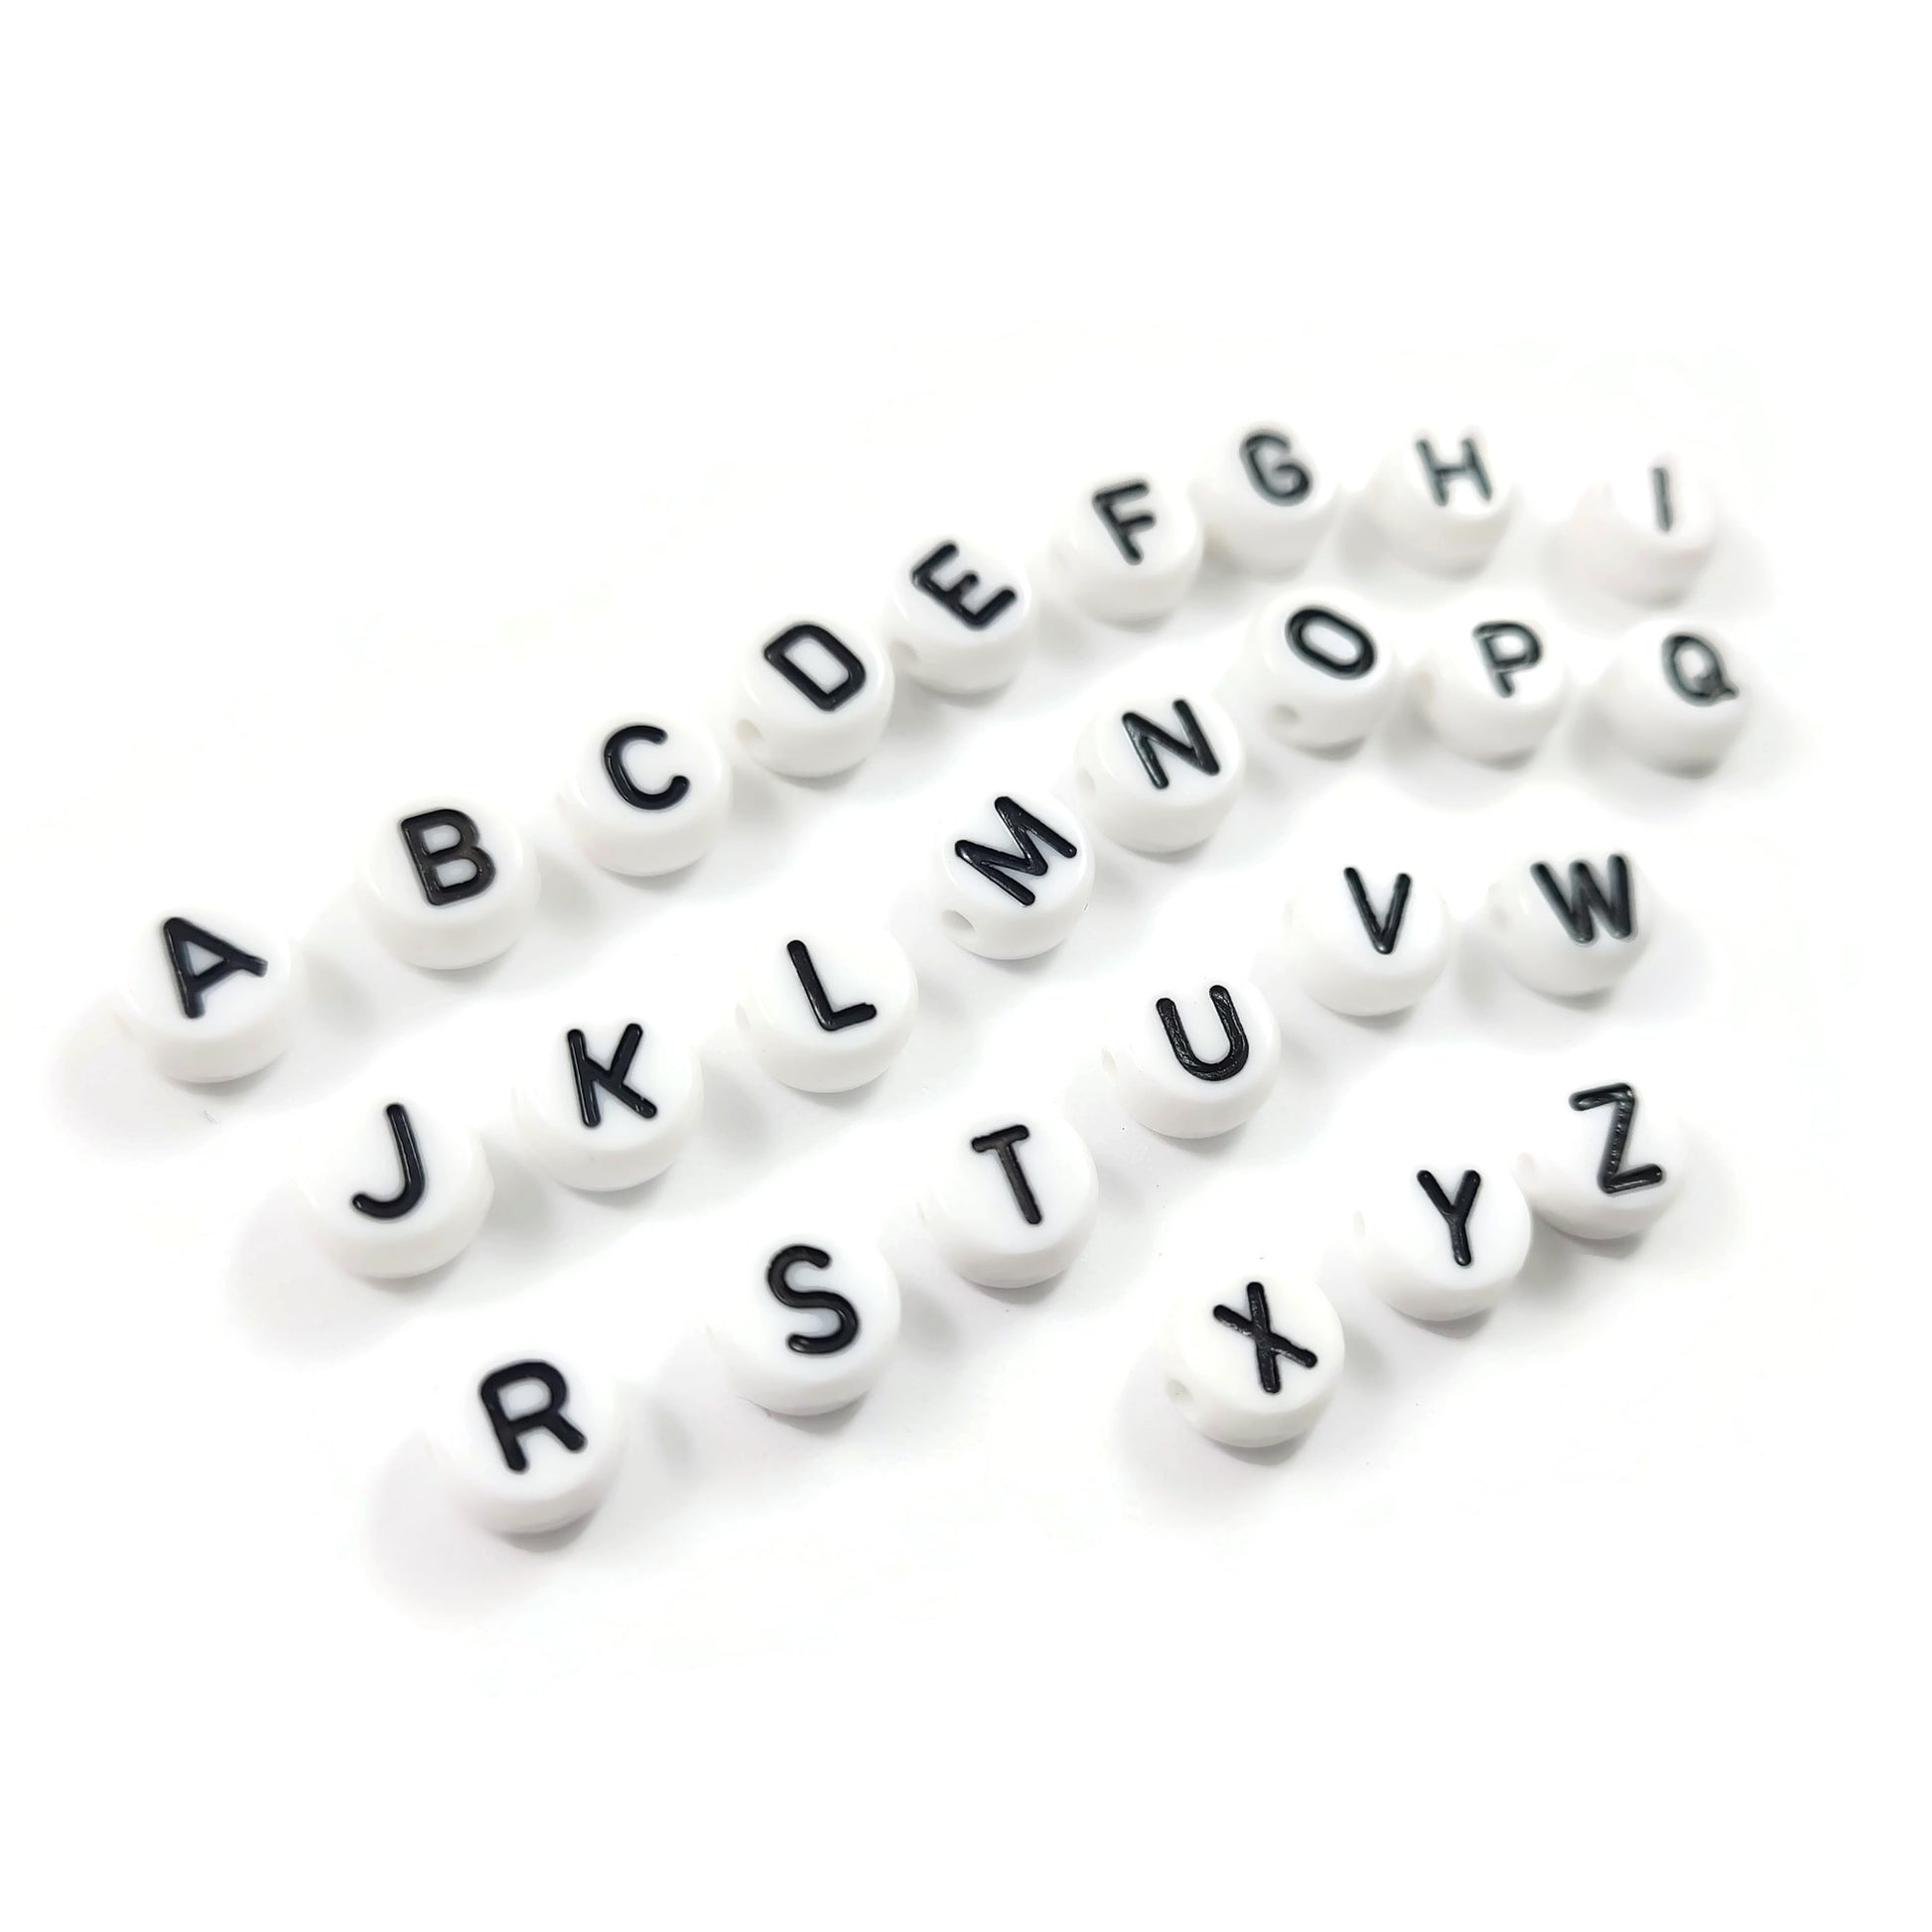 1 Black and white flat round letter bead